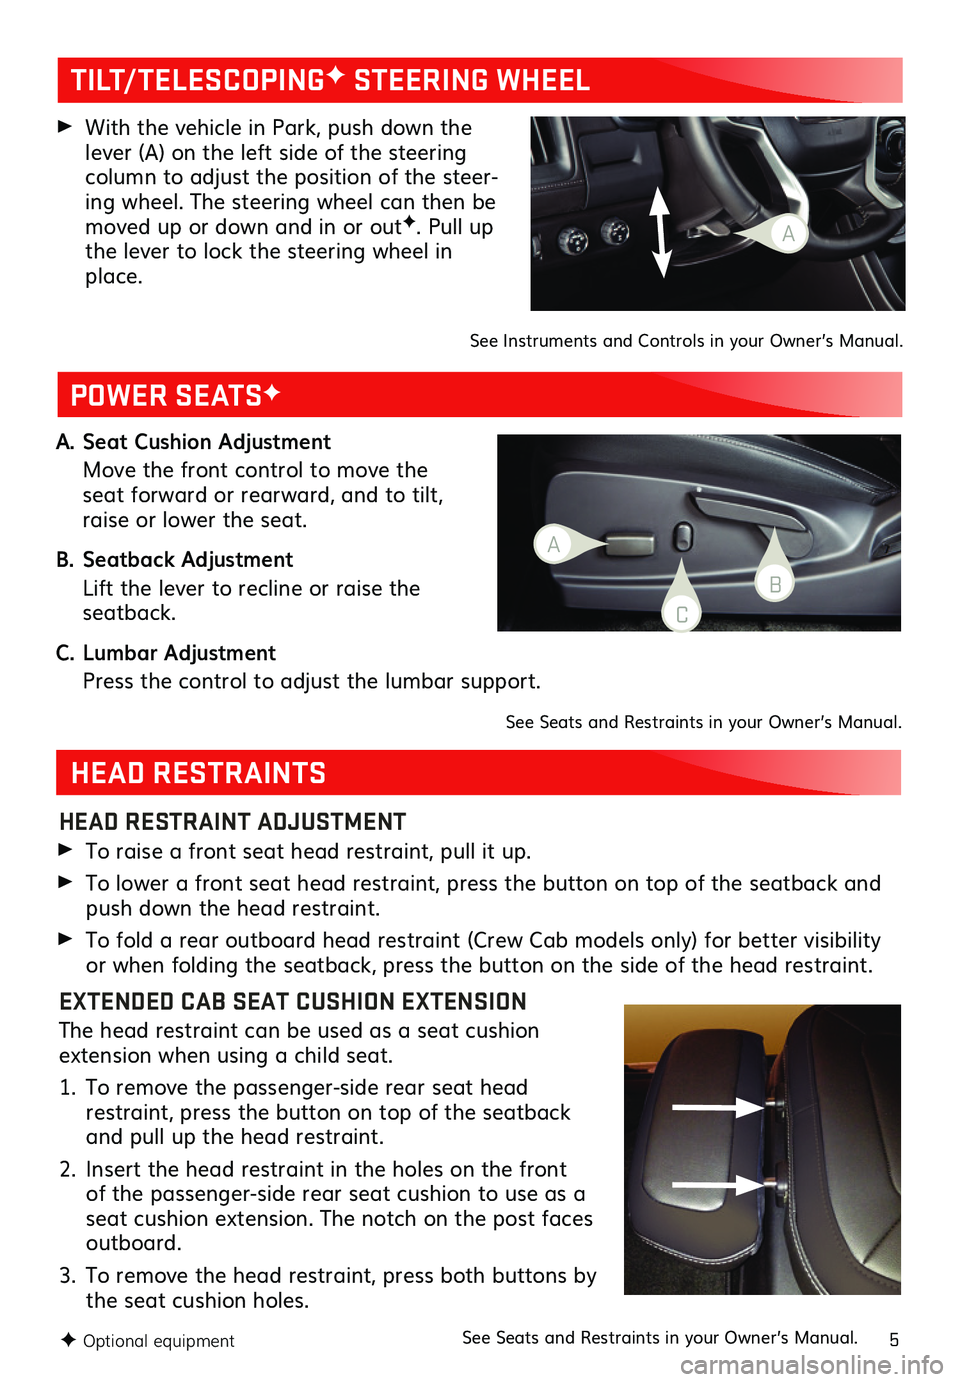 GMC CANYON 2019  Get To Know Guide 5
A. Seat Cushion Adjustment
 Move the front control to move the seat forward or rearward, and to tilt, raise or lower the seat.
B. Seatback Adjustment
 Lift the lever to recline or raise the  seatbac